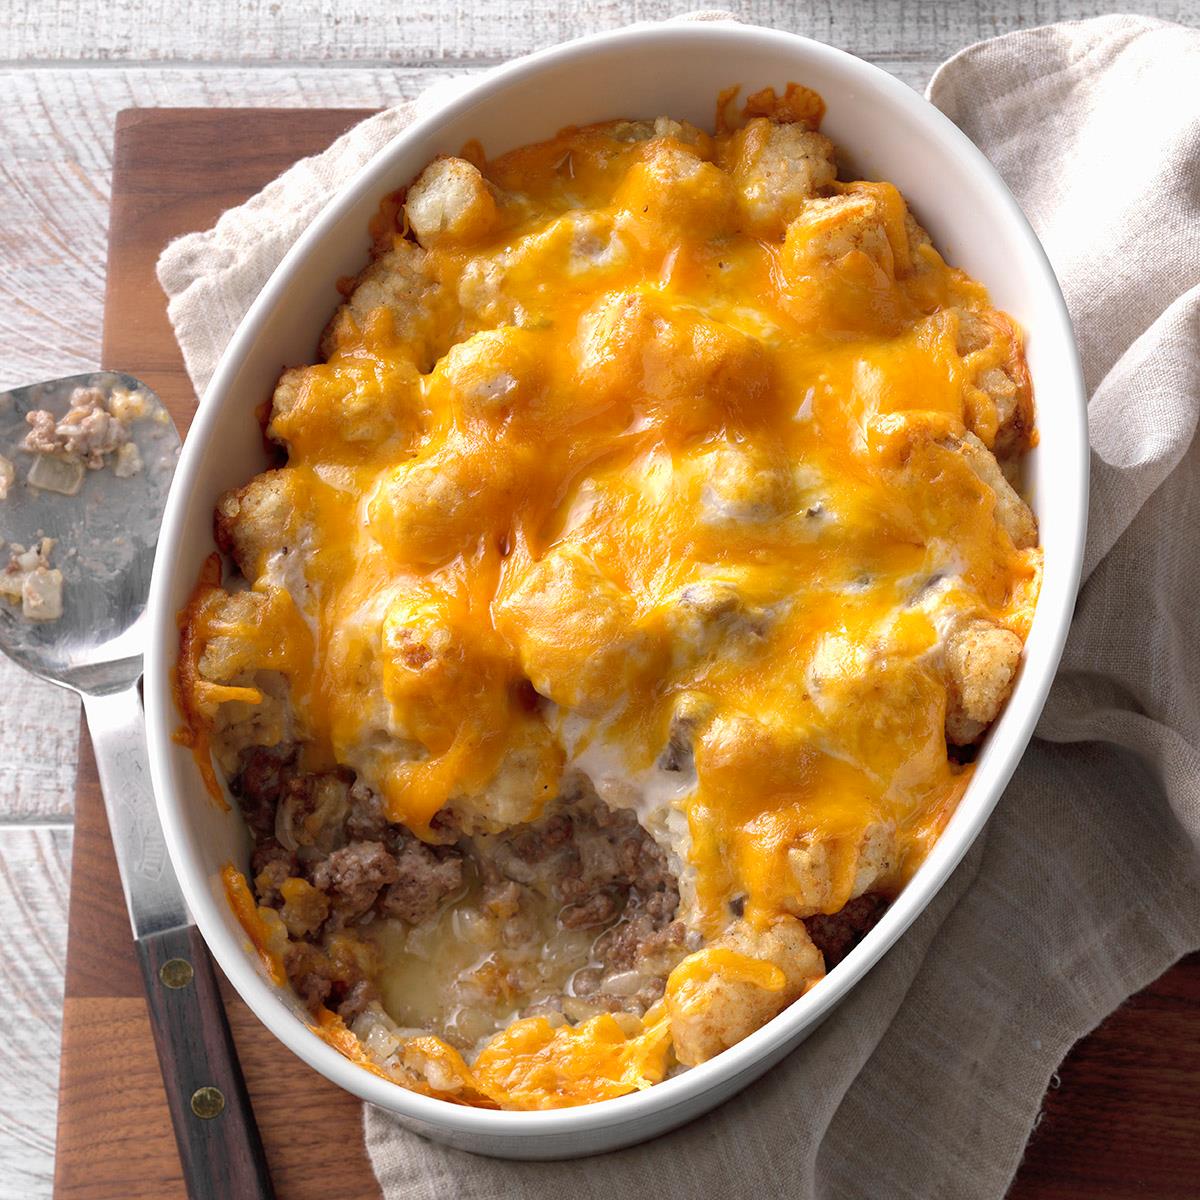 Tater Tot Casserole Recipe (With Video)